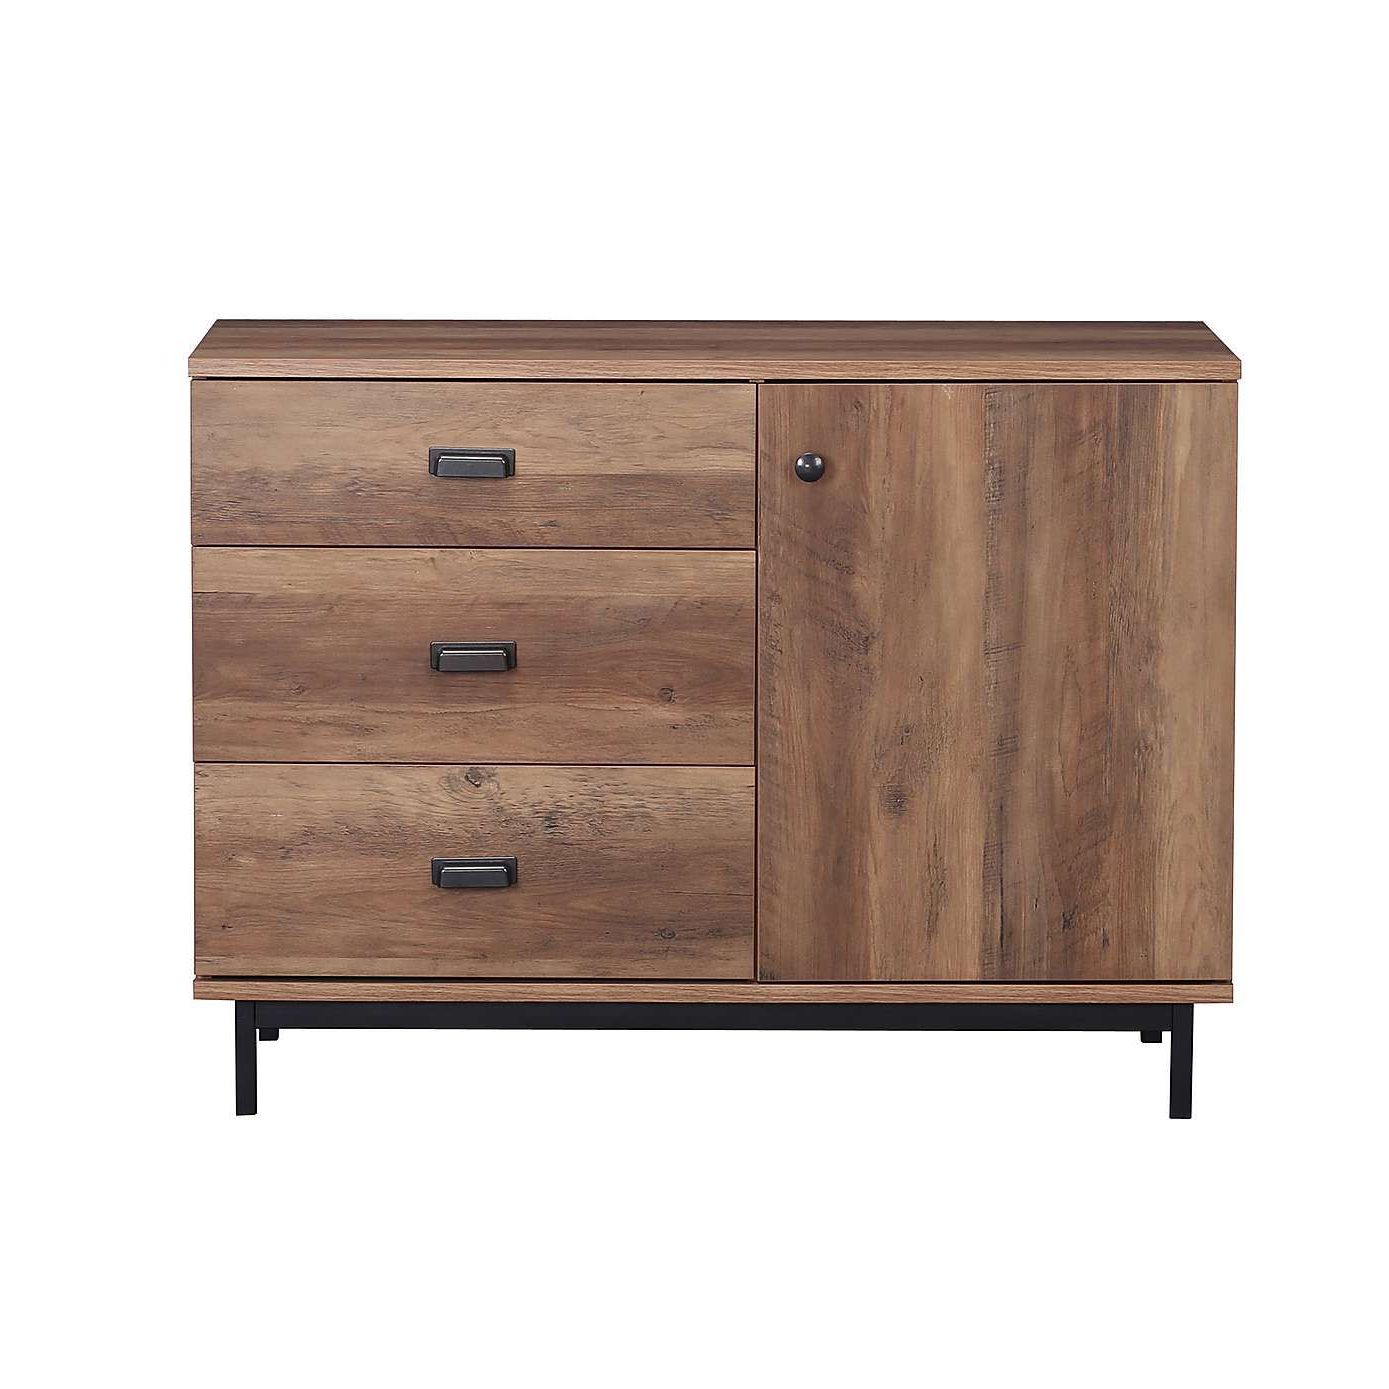 Fulton Small Sideboard | House | Small Sideboard, Sideboard With Regard To Stella Sideboards (View 5 of 20)